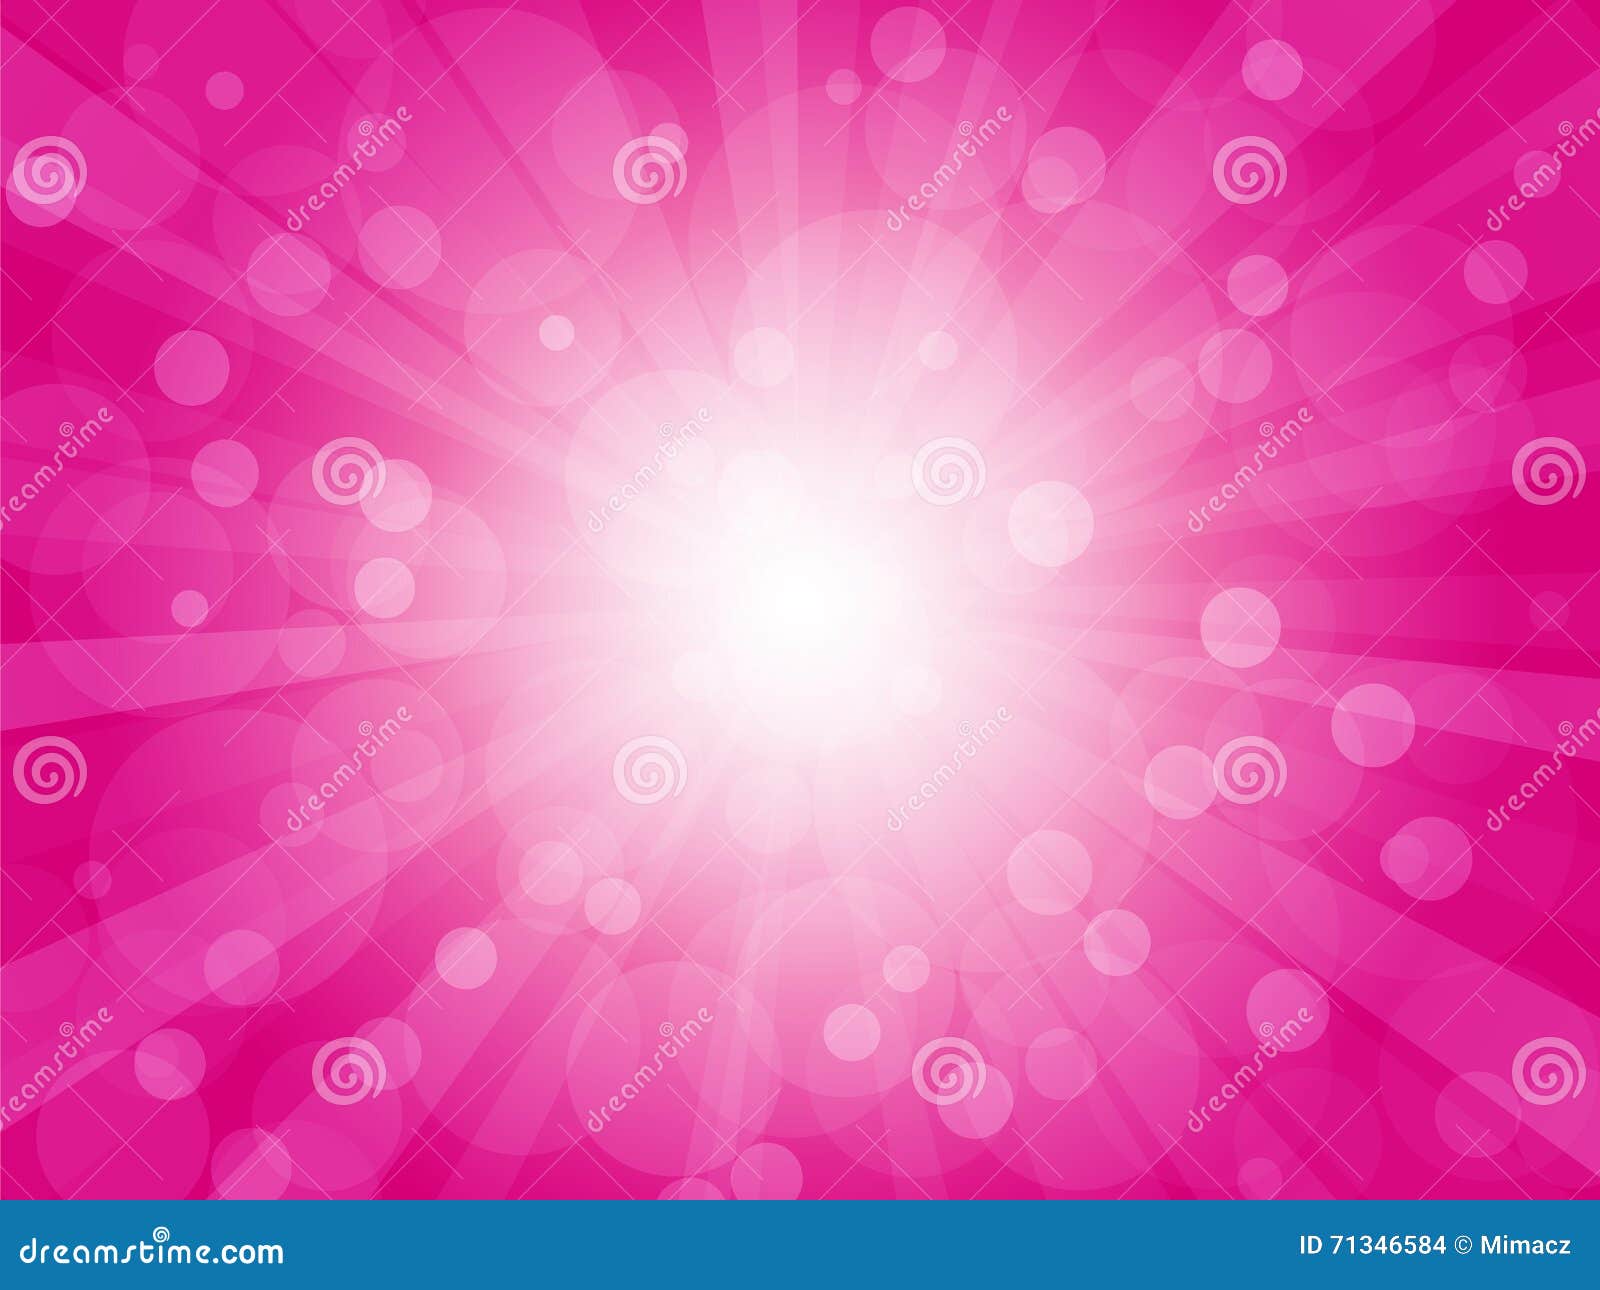 https://thumbs.dreamstime.com/z/brightly-pink-background-rays-modern-71346584.jpg